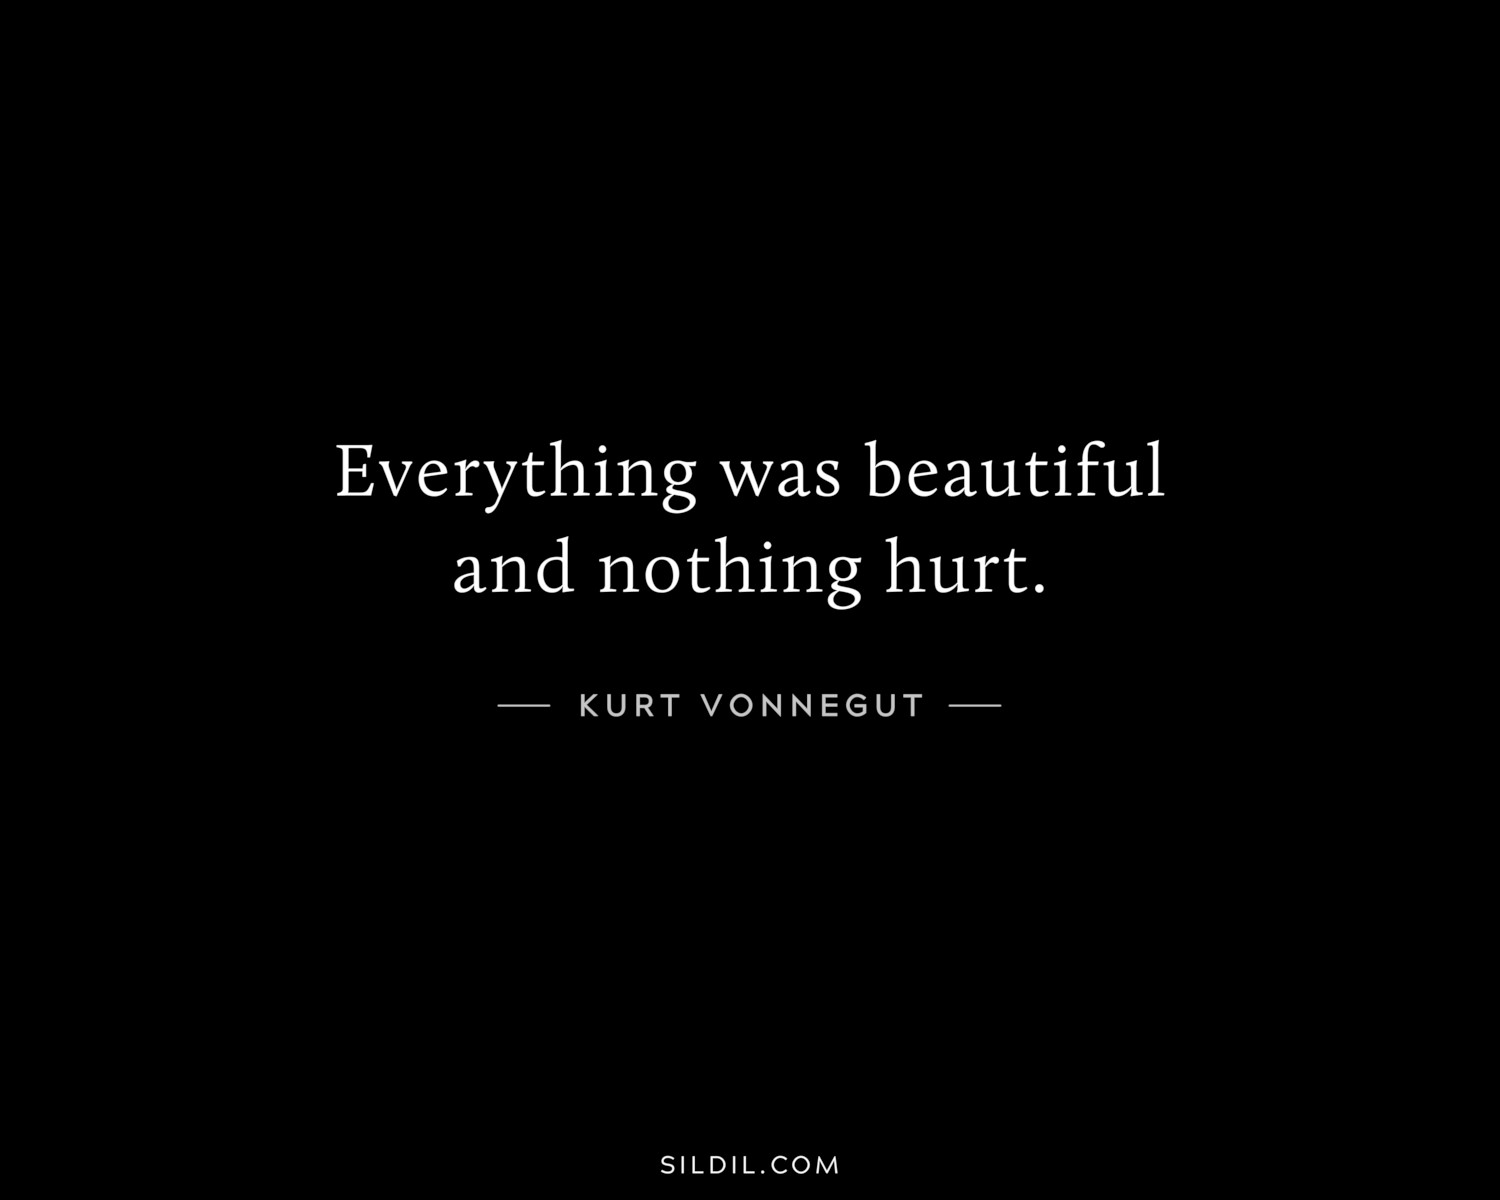 Everything was beautiful and nothing hurt.